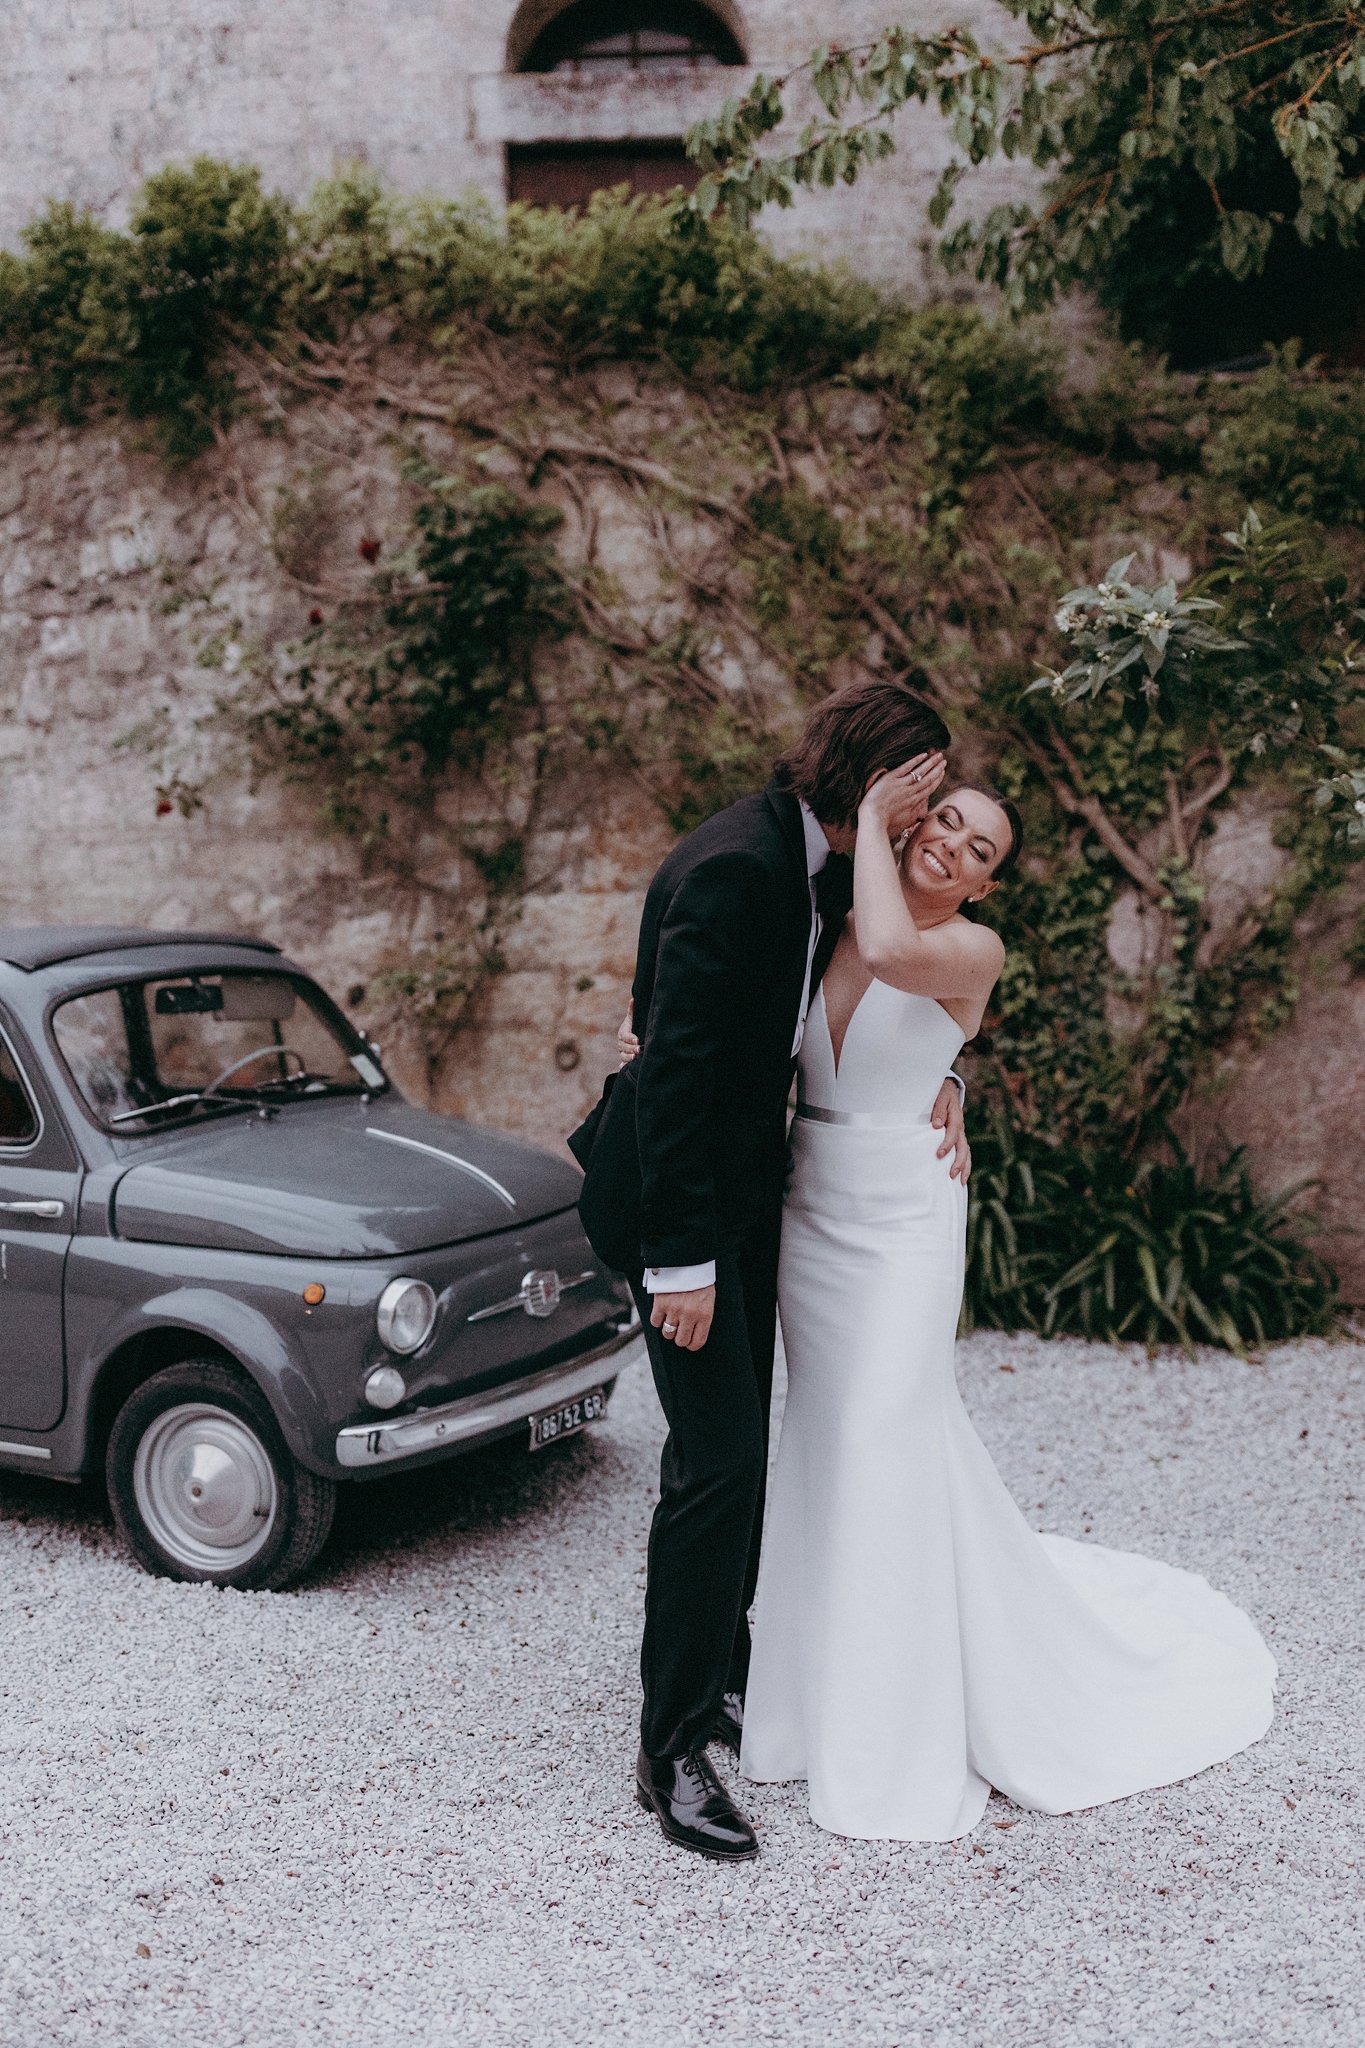 REAL WEDDING: LAUREN + LUCA'S HAPPILY-EVER-AFTER IN TUSCANY 💍

&ldquo;Our advice to anyone planning a wedding is to just roll with it; no matter what gets thrown at you (and it will, nothing ever goes to plan!) stay in the moment, and just enjoy hav